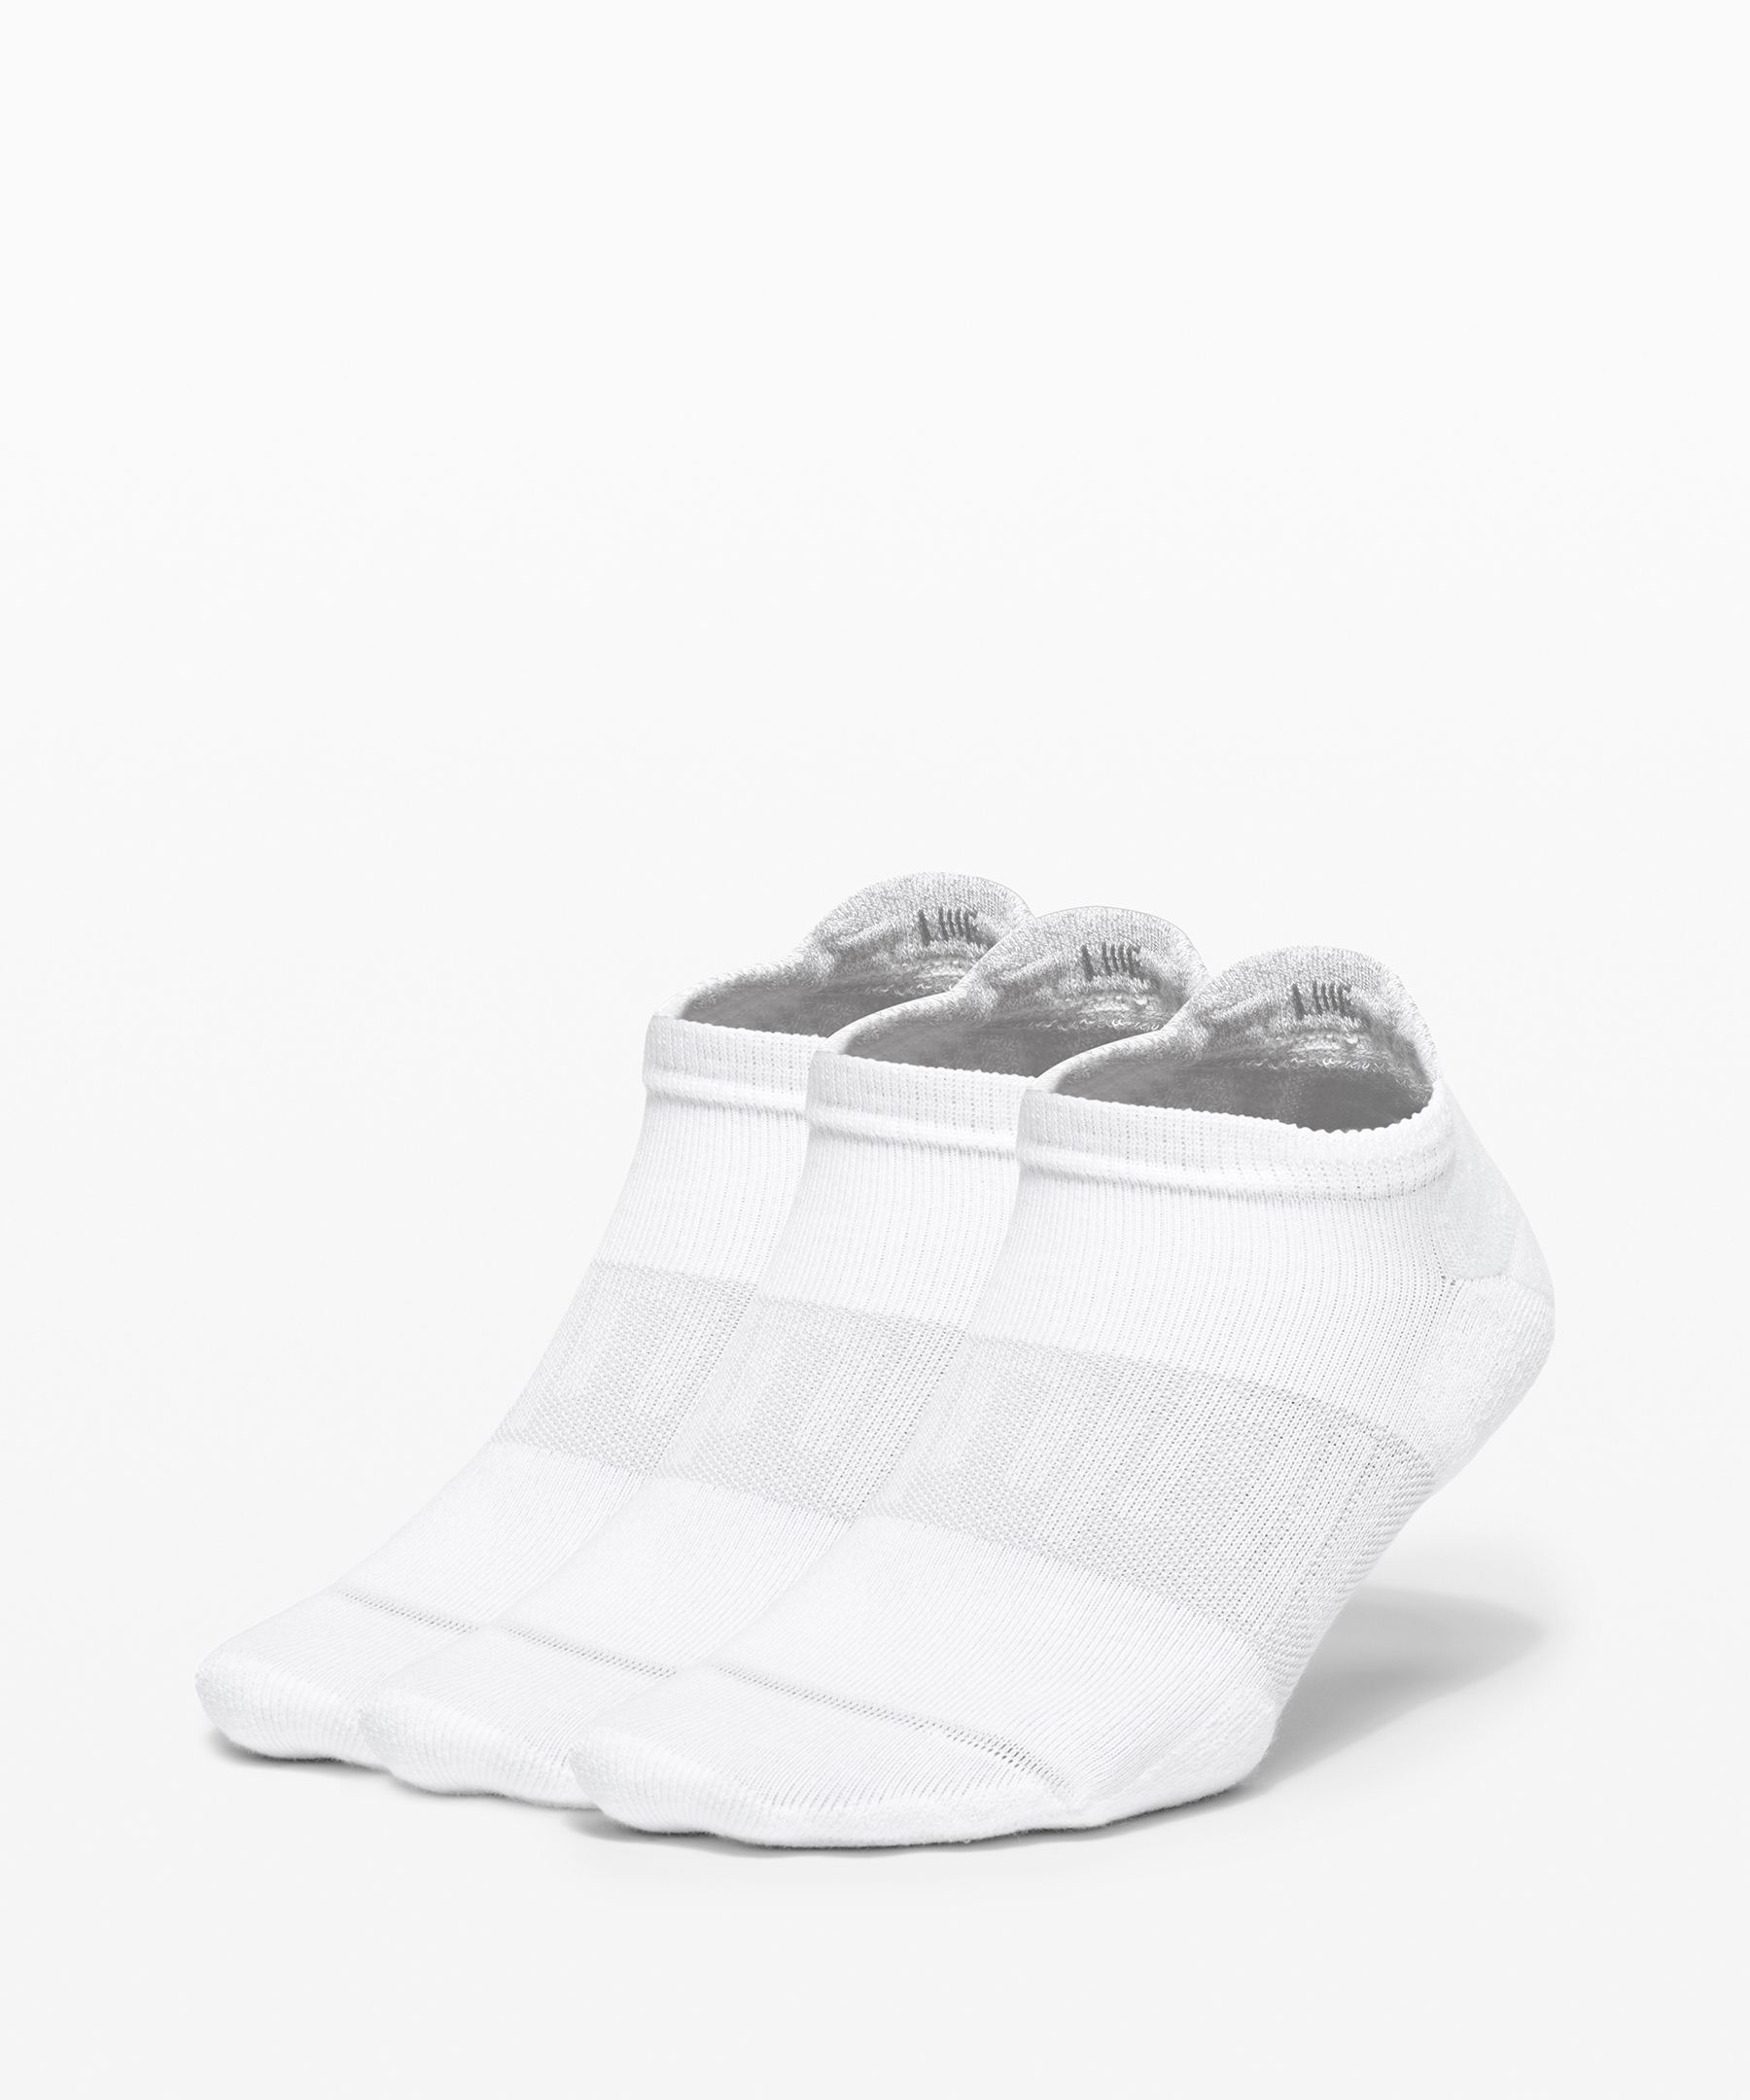 Lululemon Womens Daily Stride Low-Ankle Sock 3 Pack Multi-Colour